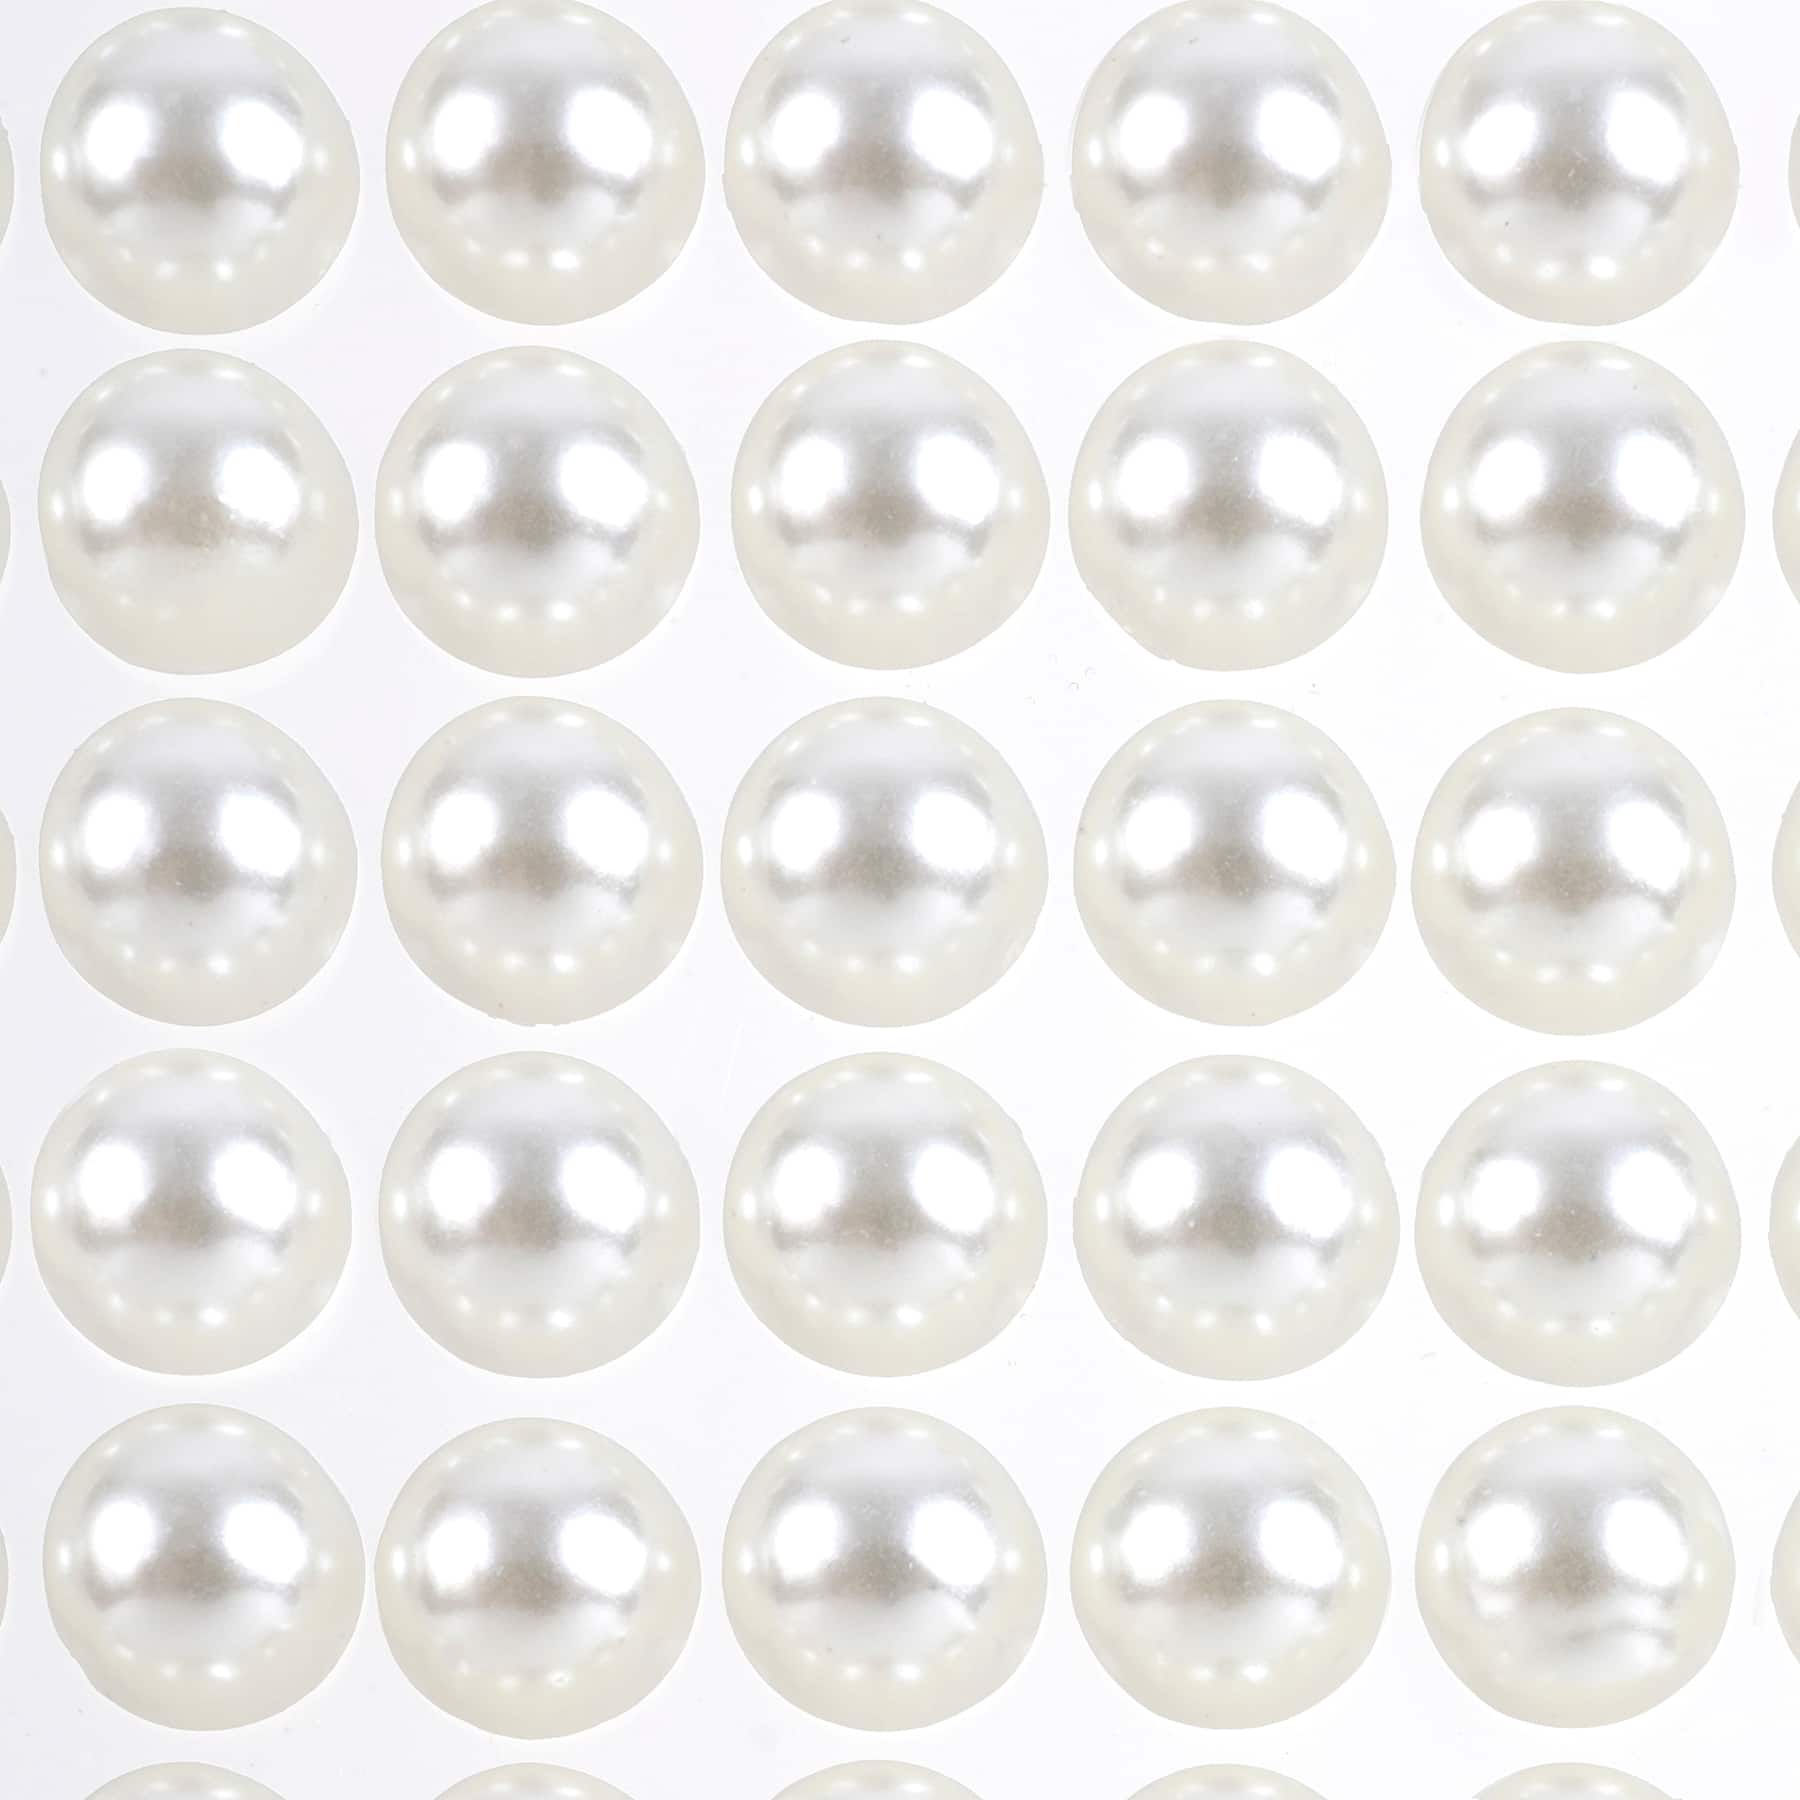 12 Packs: 20 ct. (240 total) 16mm Pearl Stickers by Recollections™ 